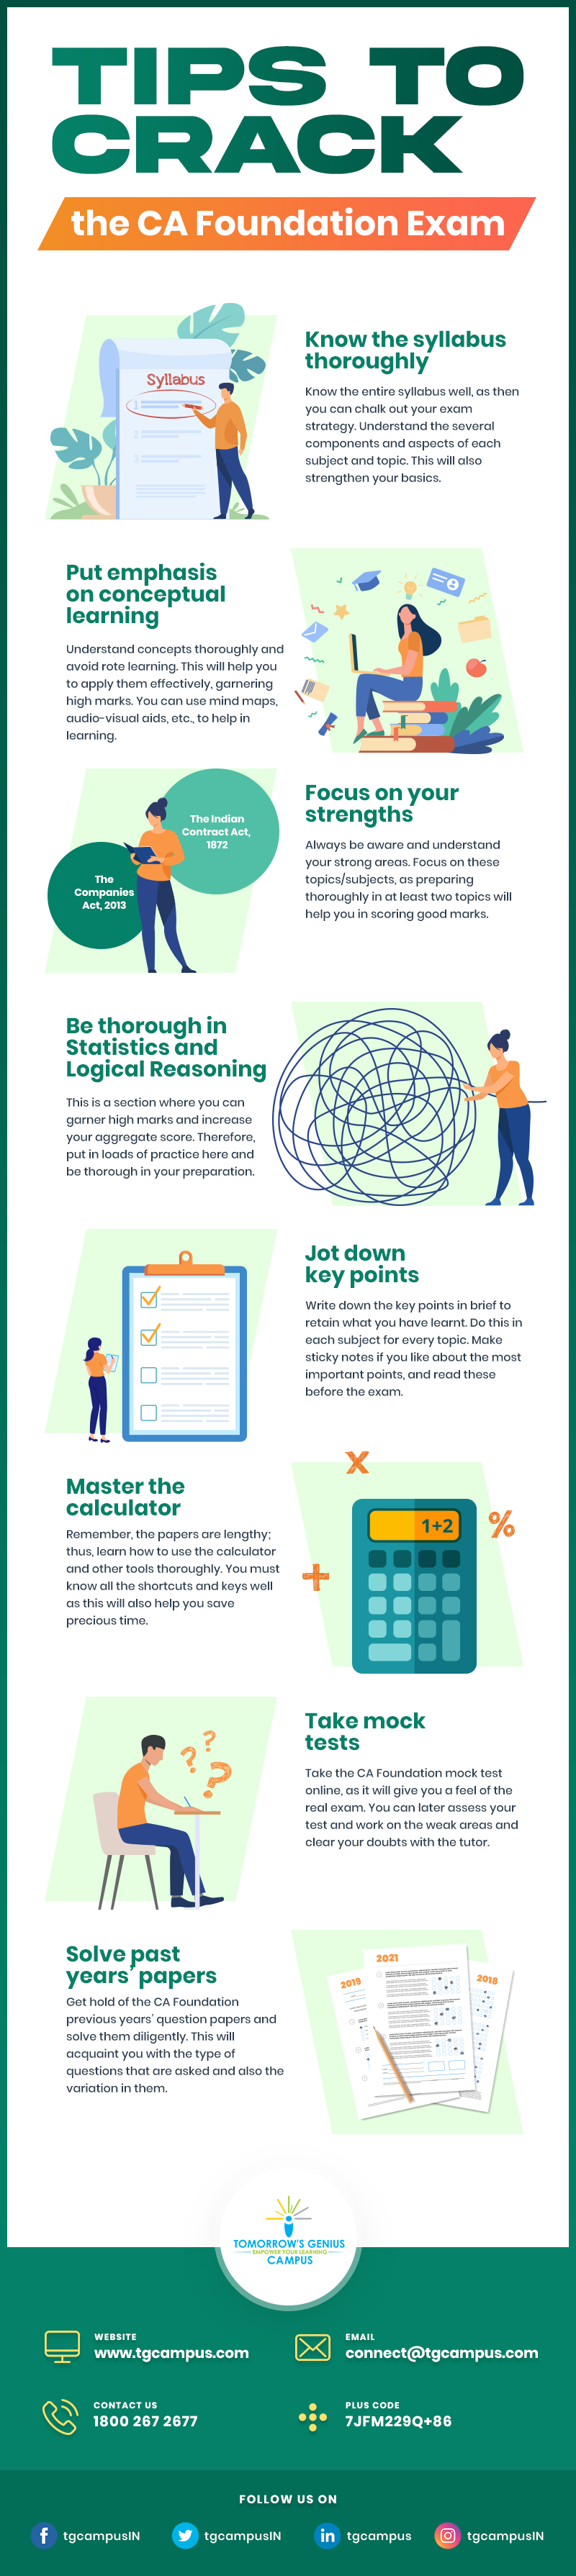 Tips to crack the CA Foundation exam - Infographic